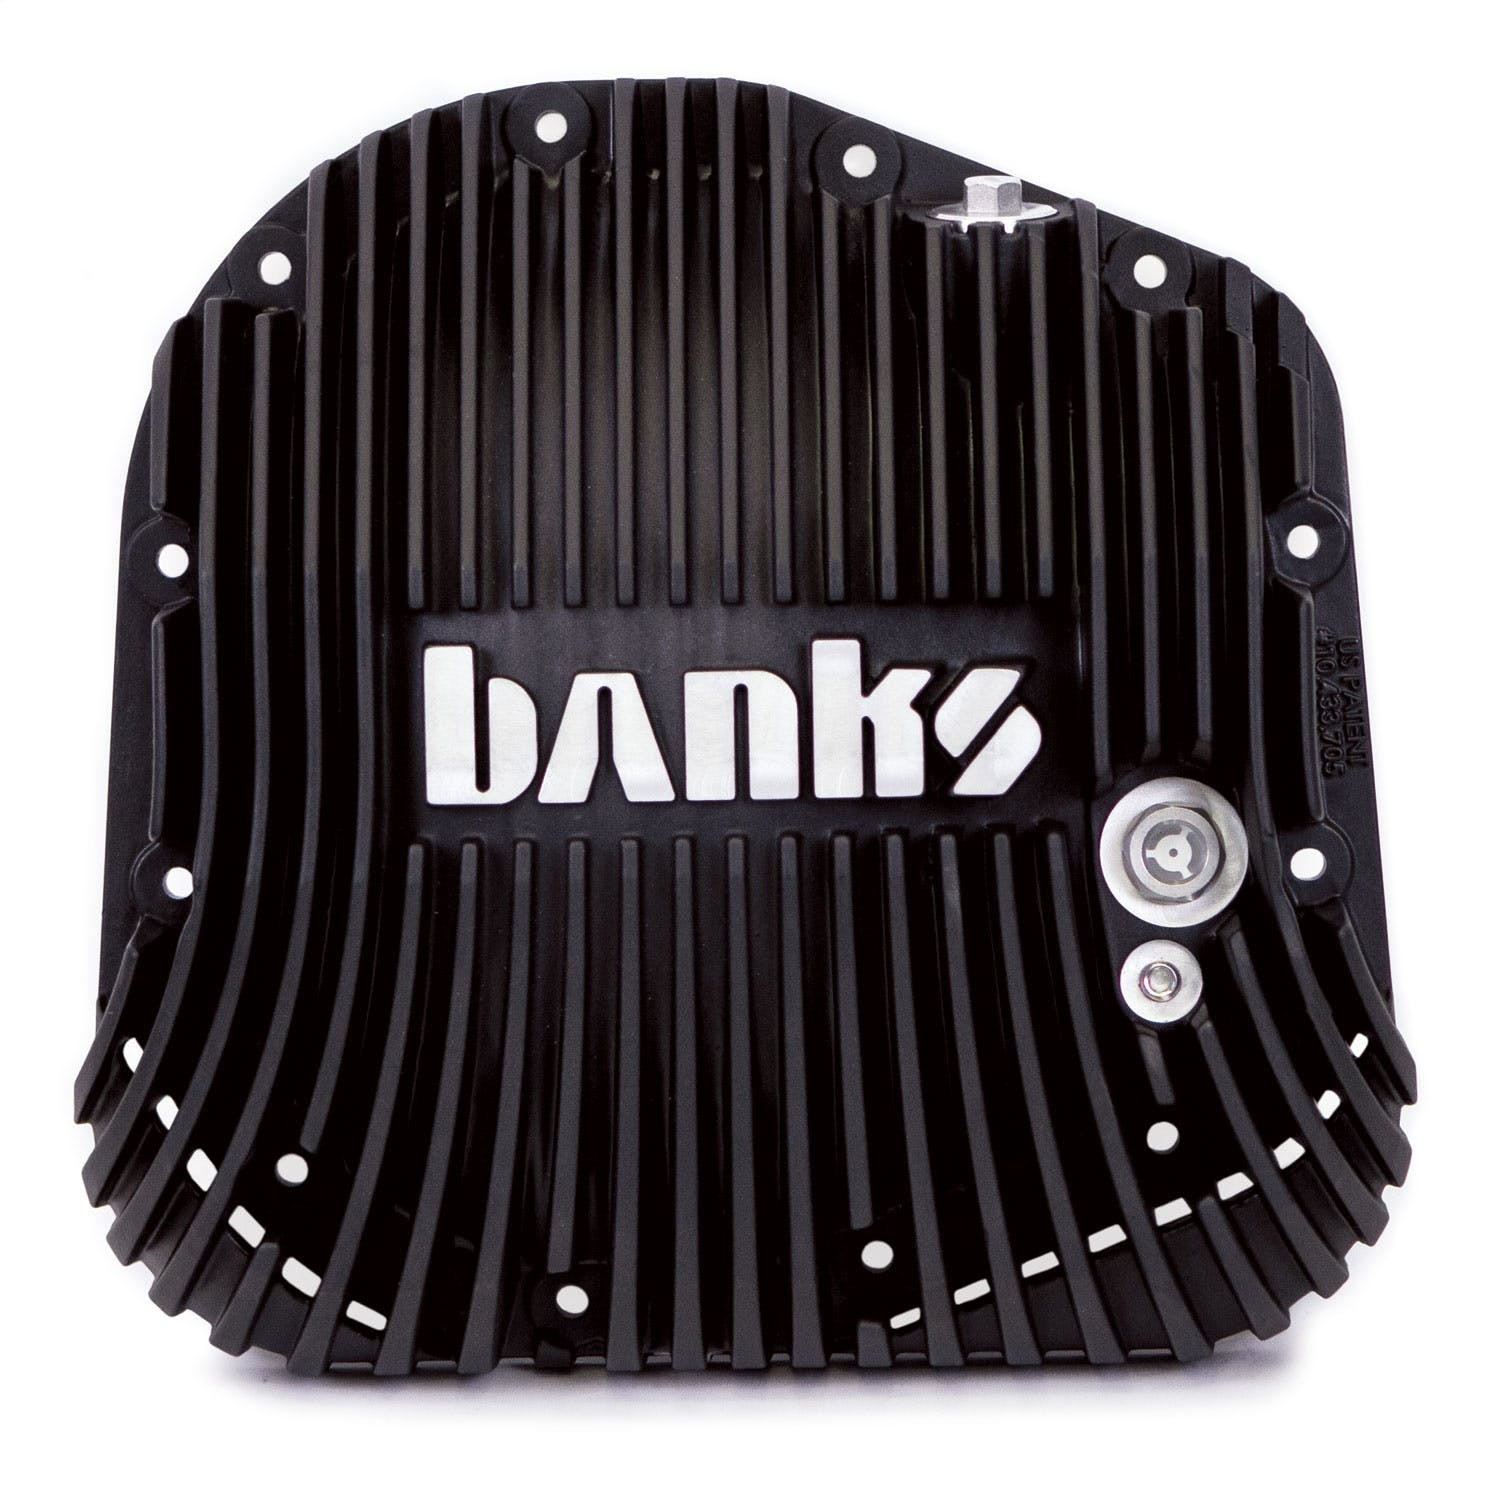 Banks Power 19258 Ram-Air® Differential Cover Kit